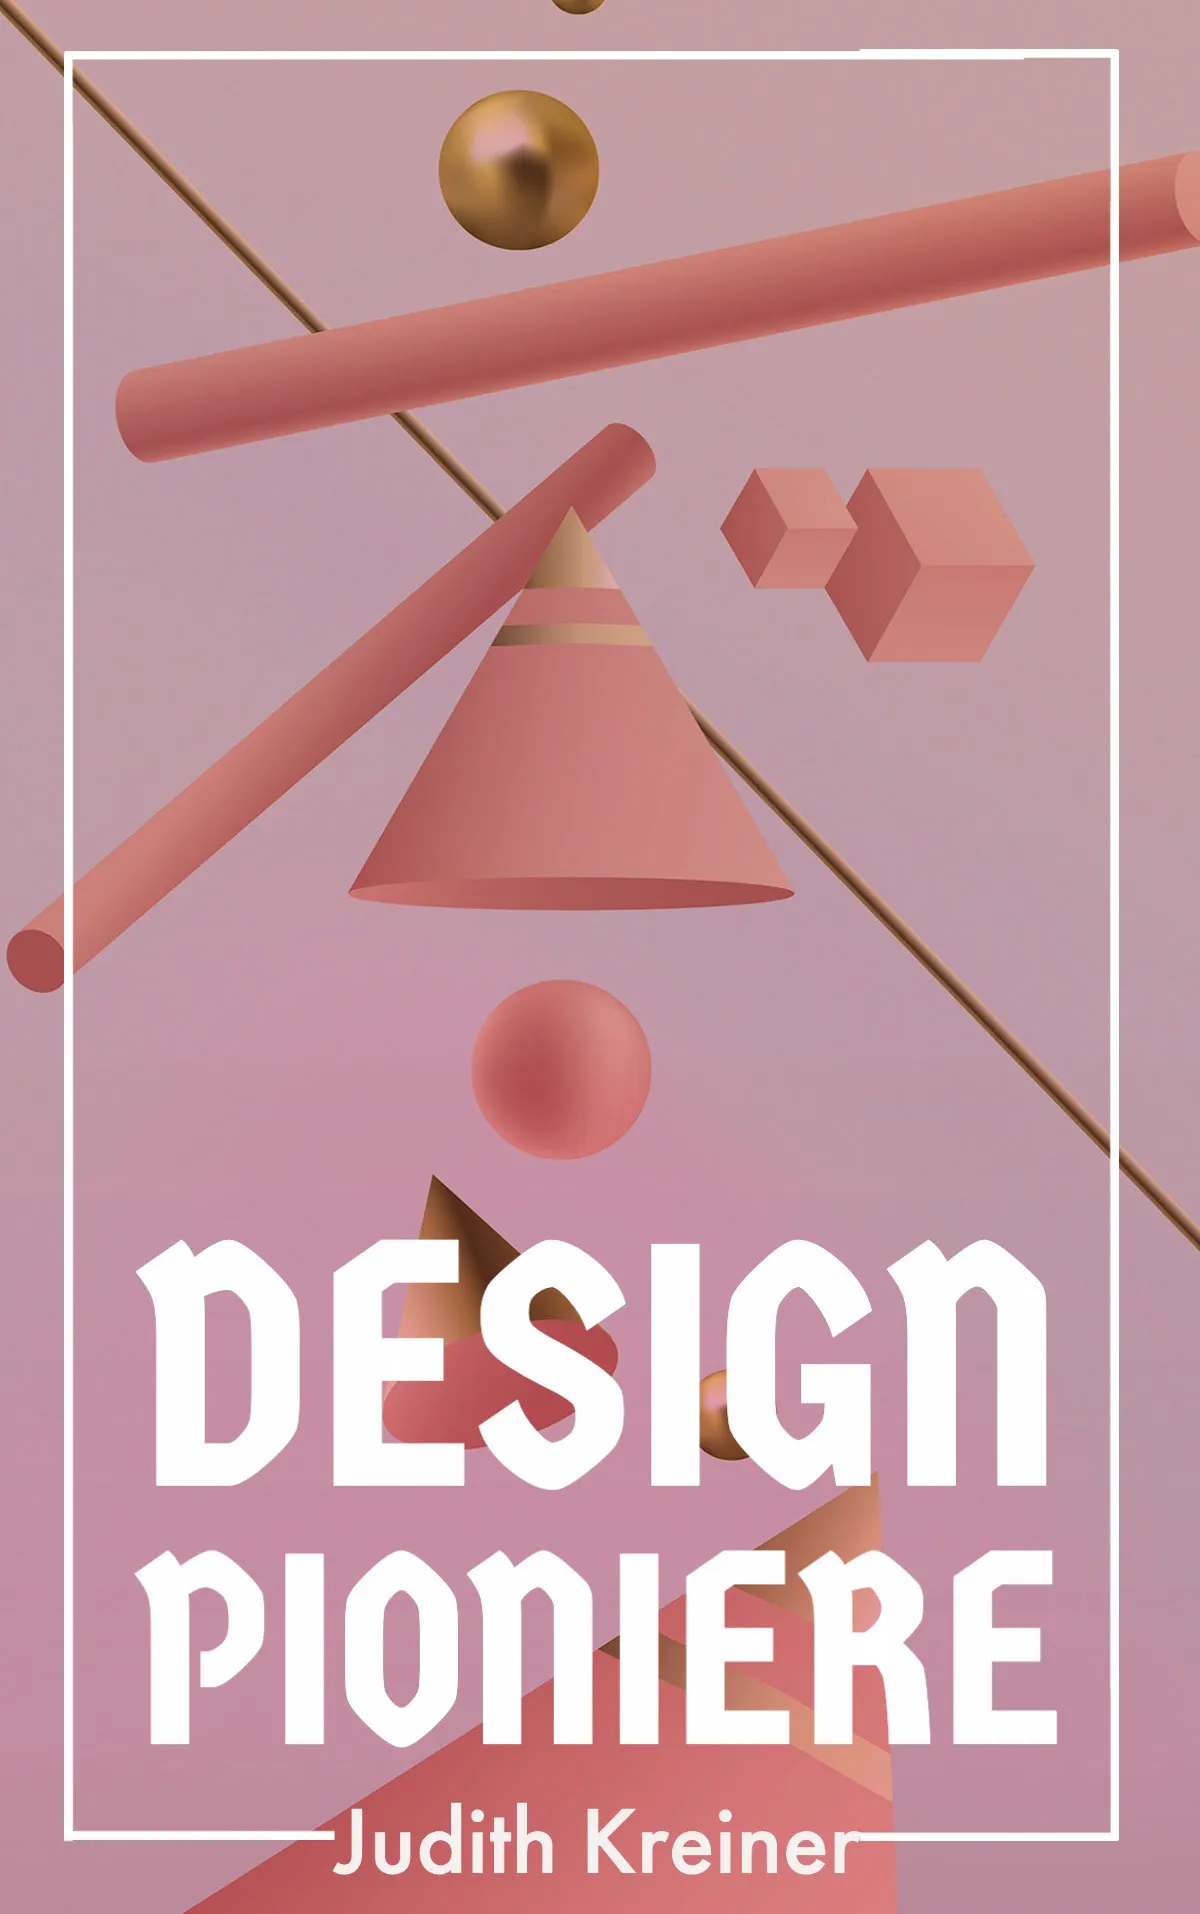 Pink 3D Shapes Design Pioneers Book Cover